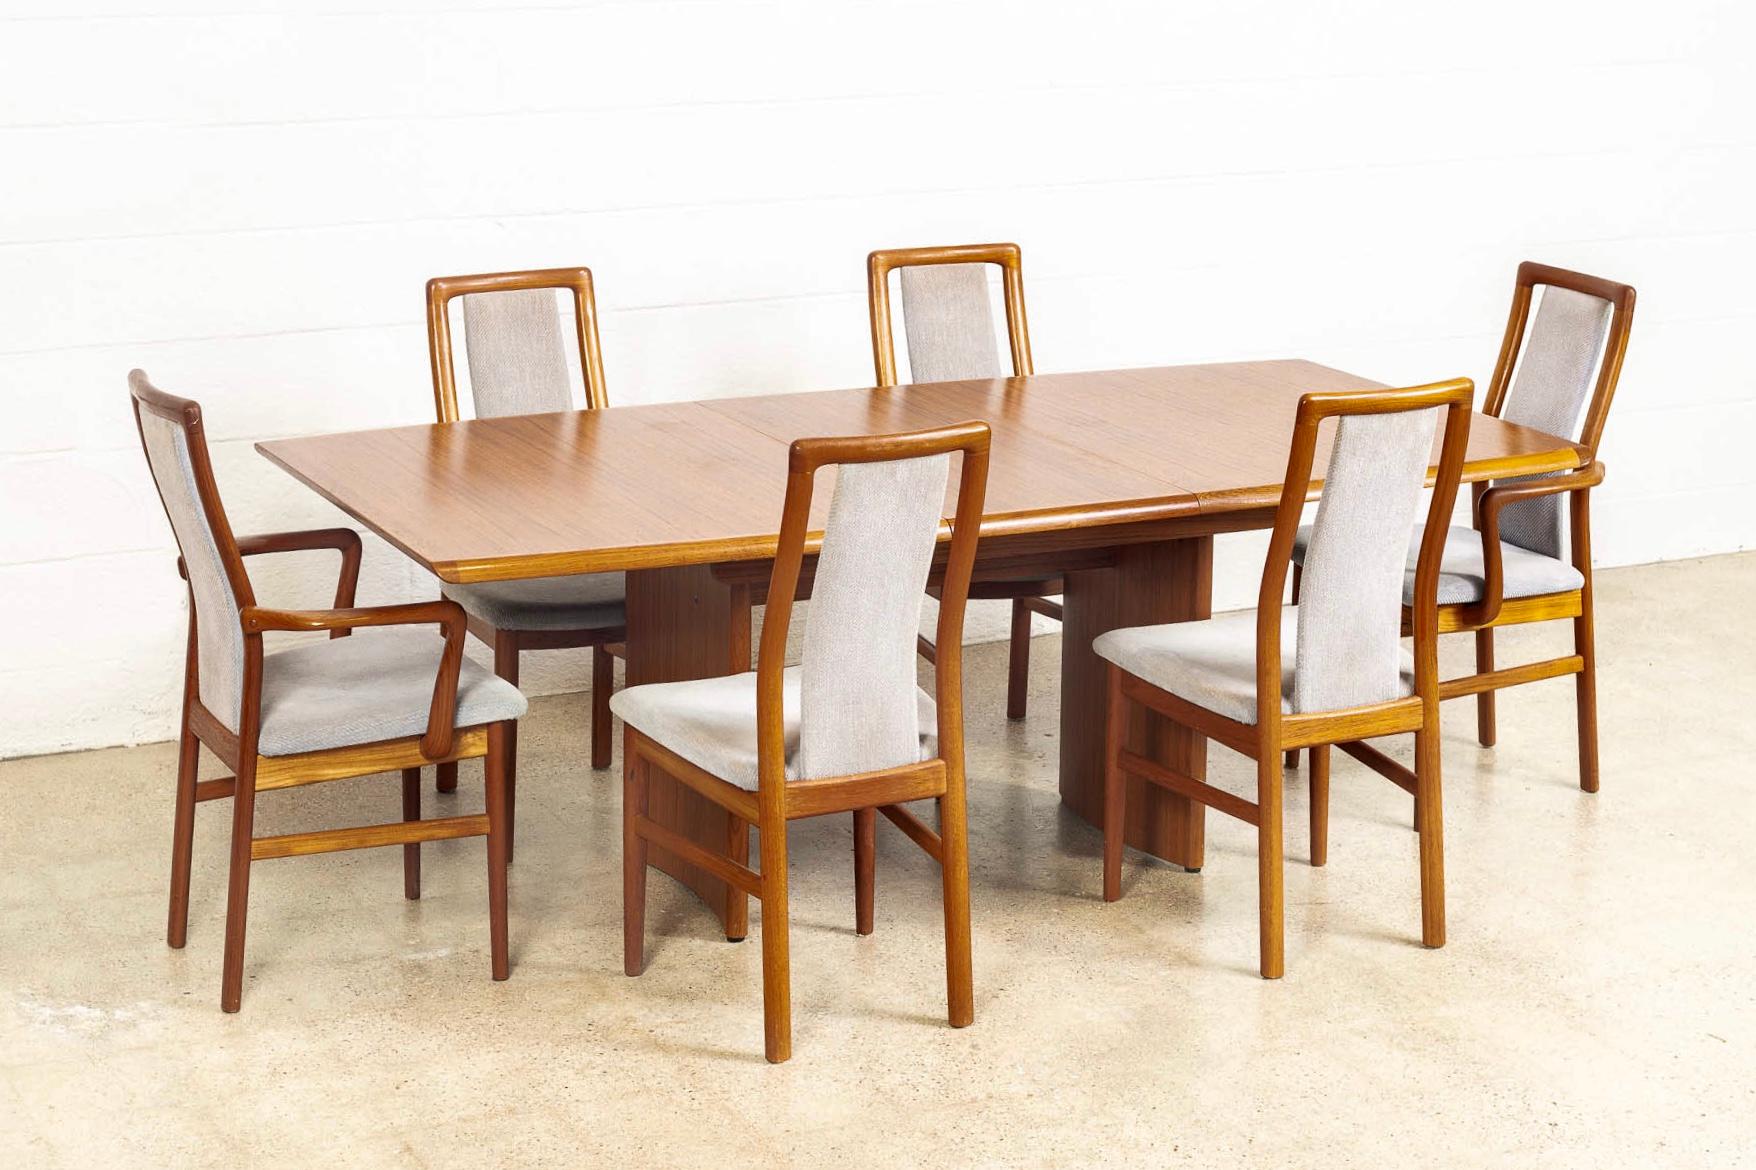 Mid-Century Danish Modern Teak Wood Upholstered Dining Chairs, Set of 6 For Sale 2